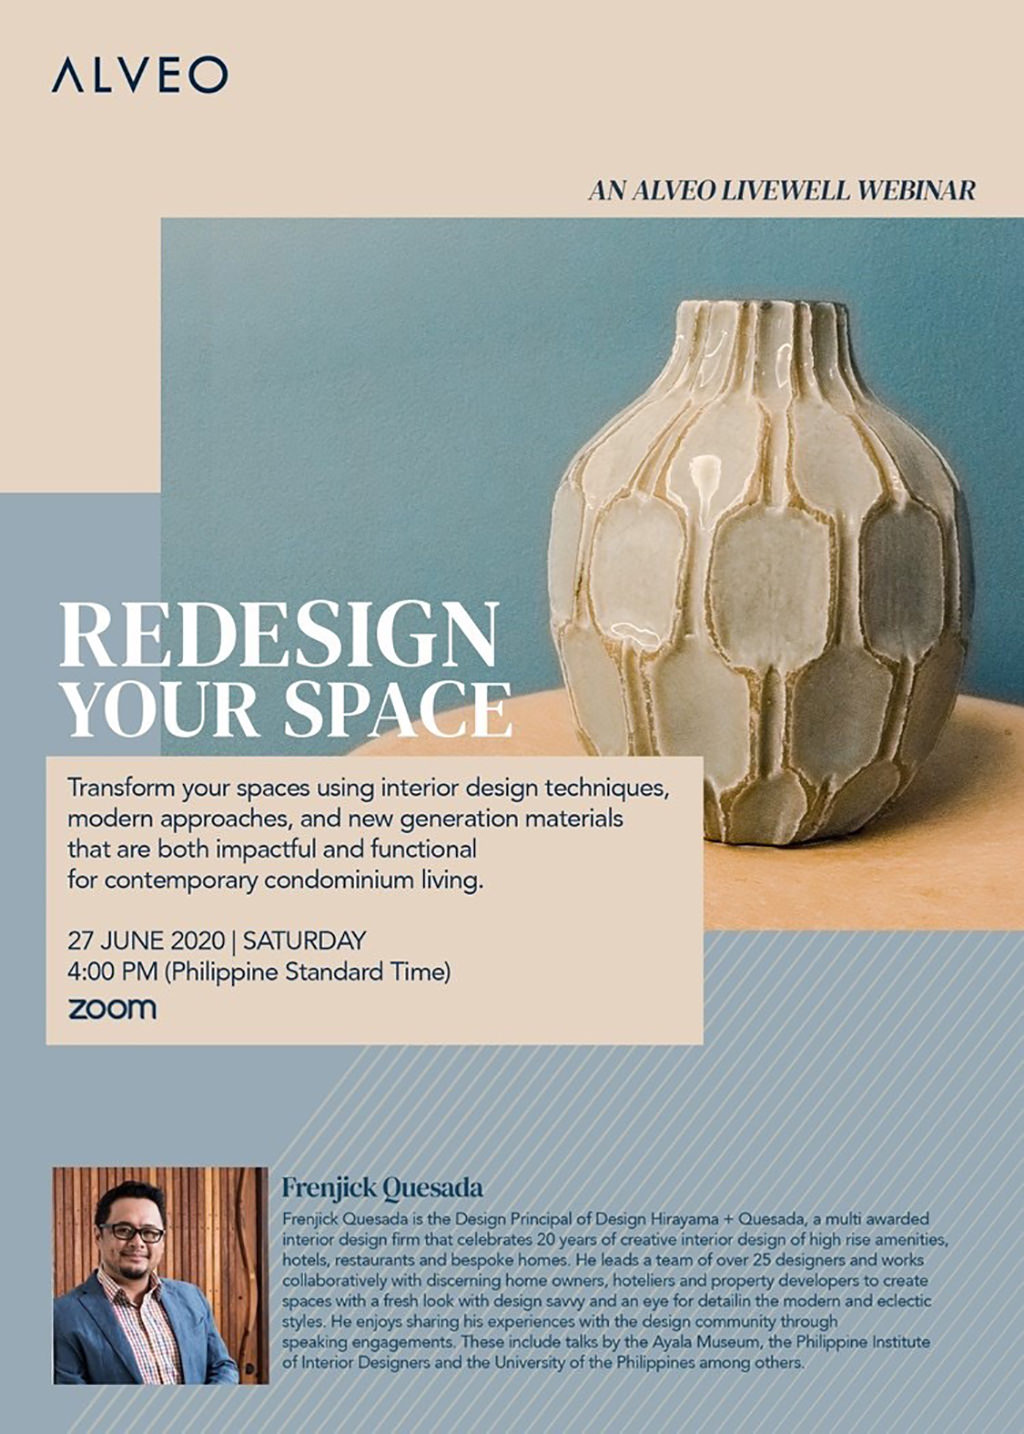 DesignHQ - Redesign Your Space: An Alveo Livewell Webinar